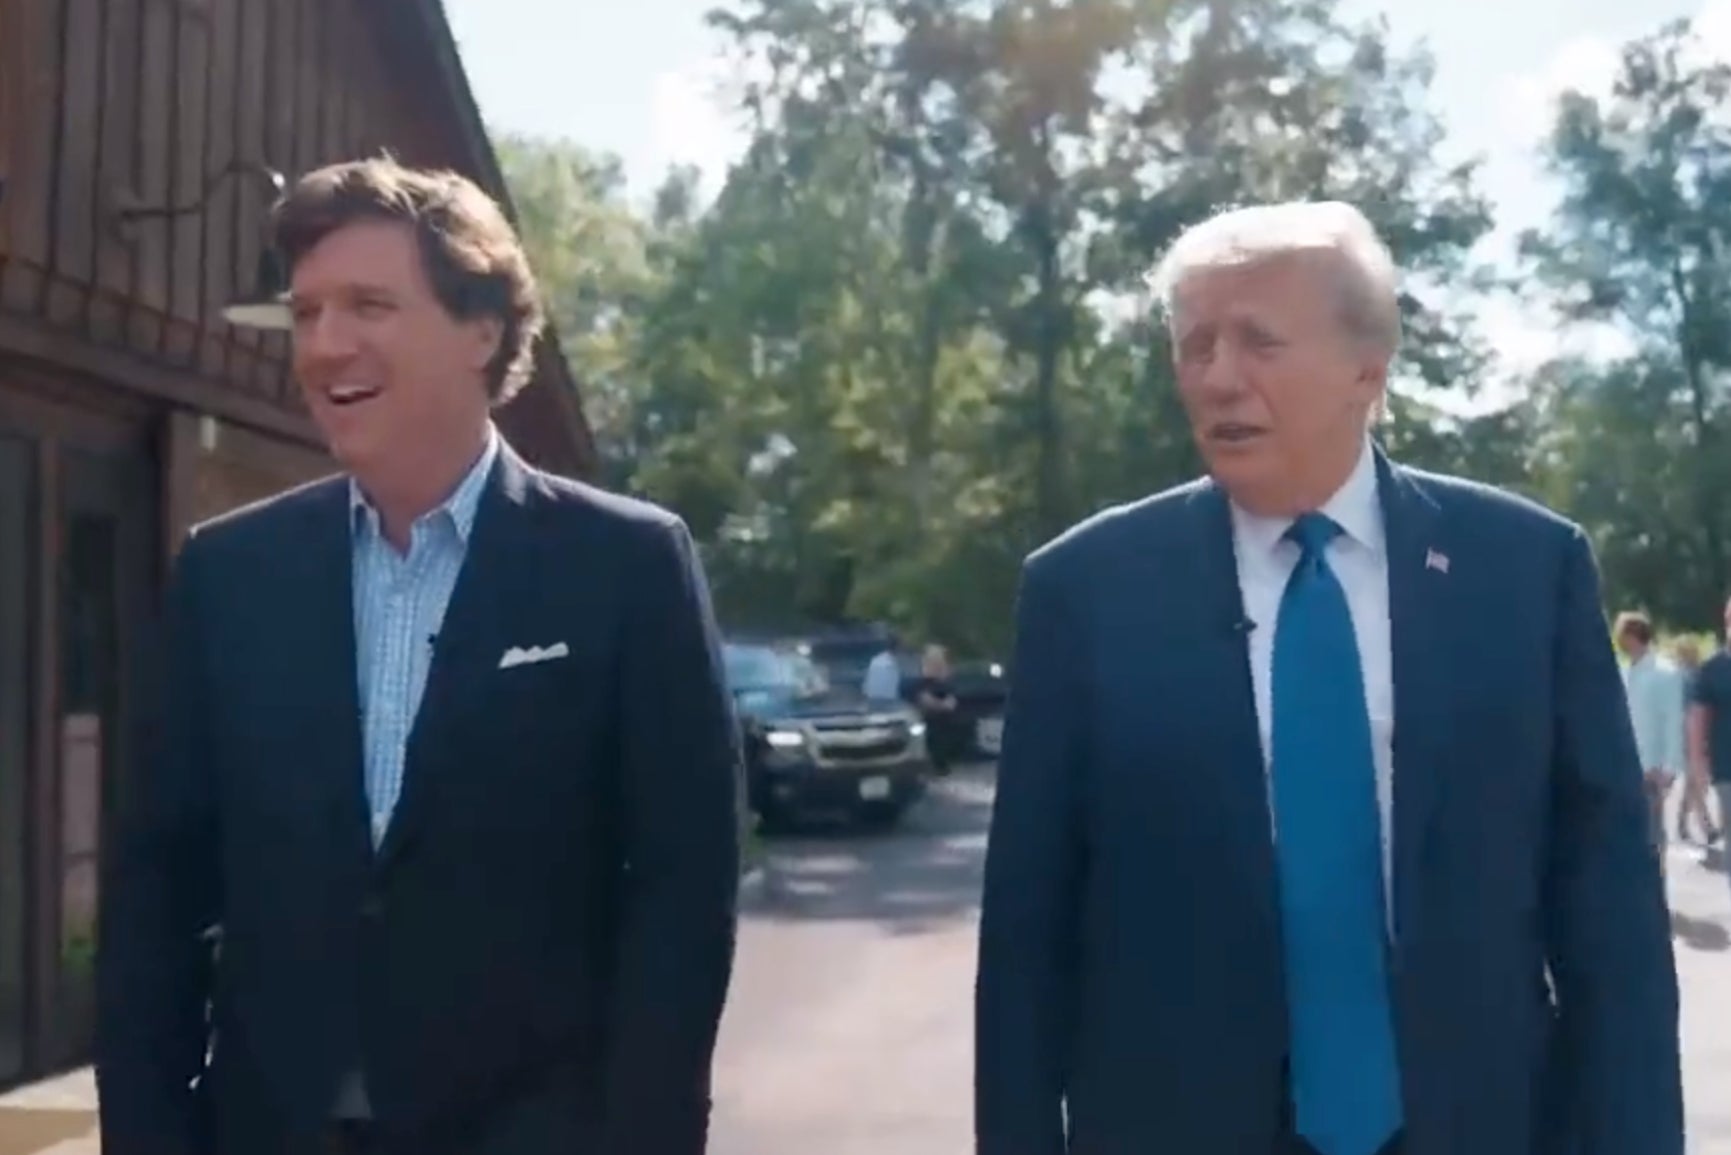 Tucker Carlson interviewed former President Donald Trump ahead of the Republican Party’s first 2024 election debate